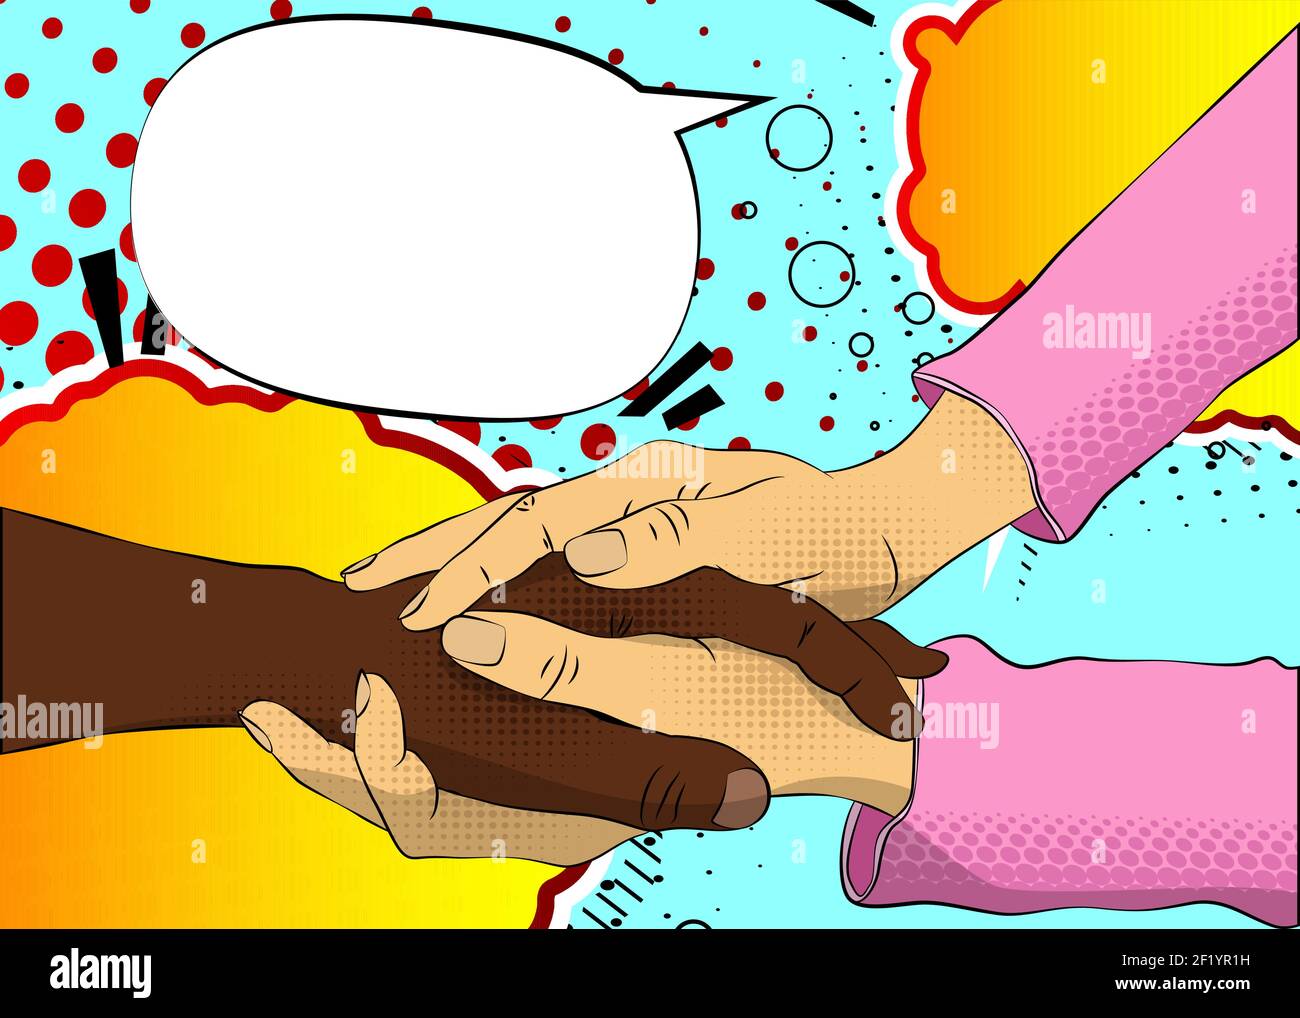 Close up of a Caucasian woman holding a black male hand. Showing candid feelings like love, trust, appreciation, hope, compassion or saying sorry in a Stock Vector